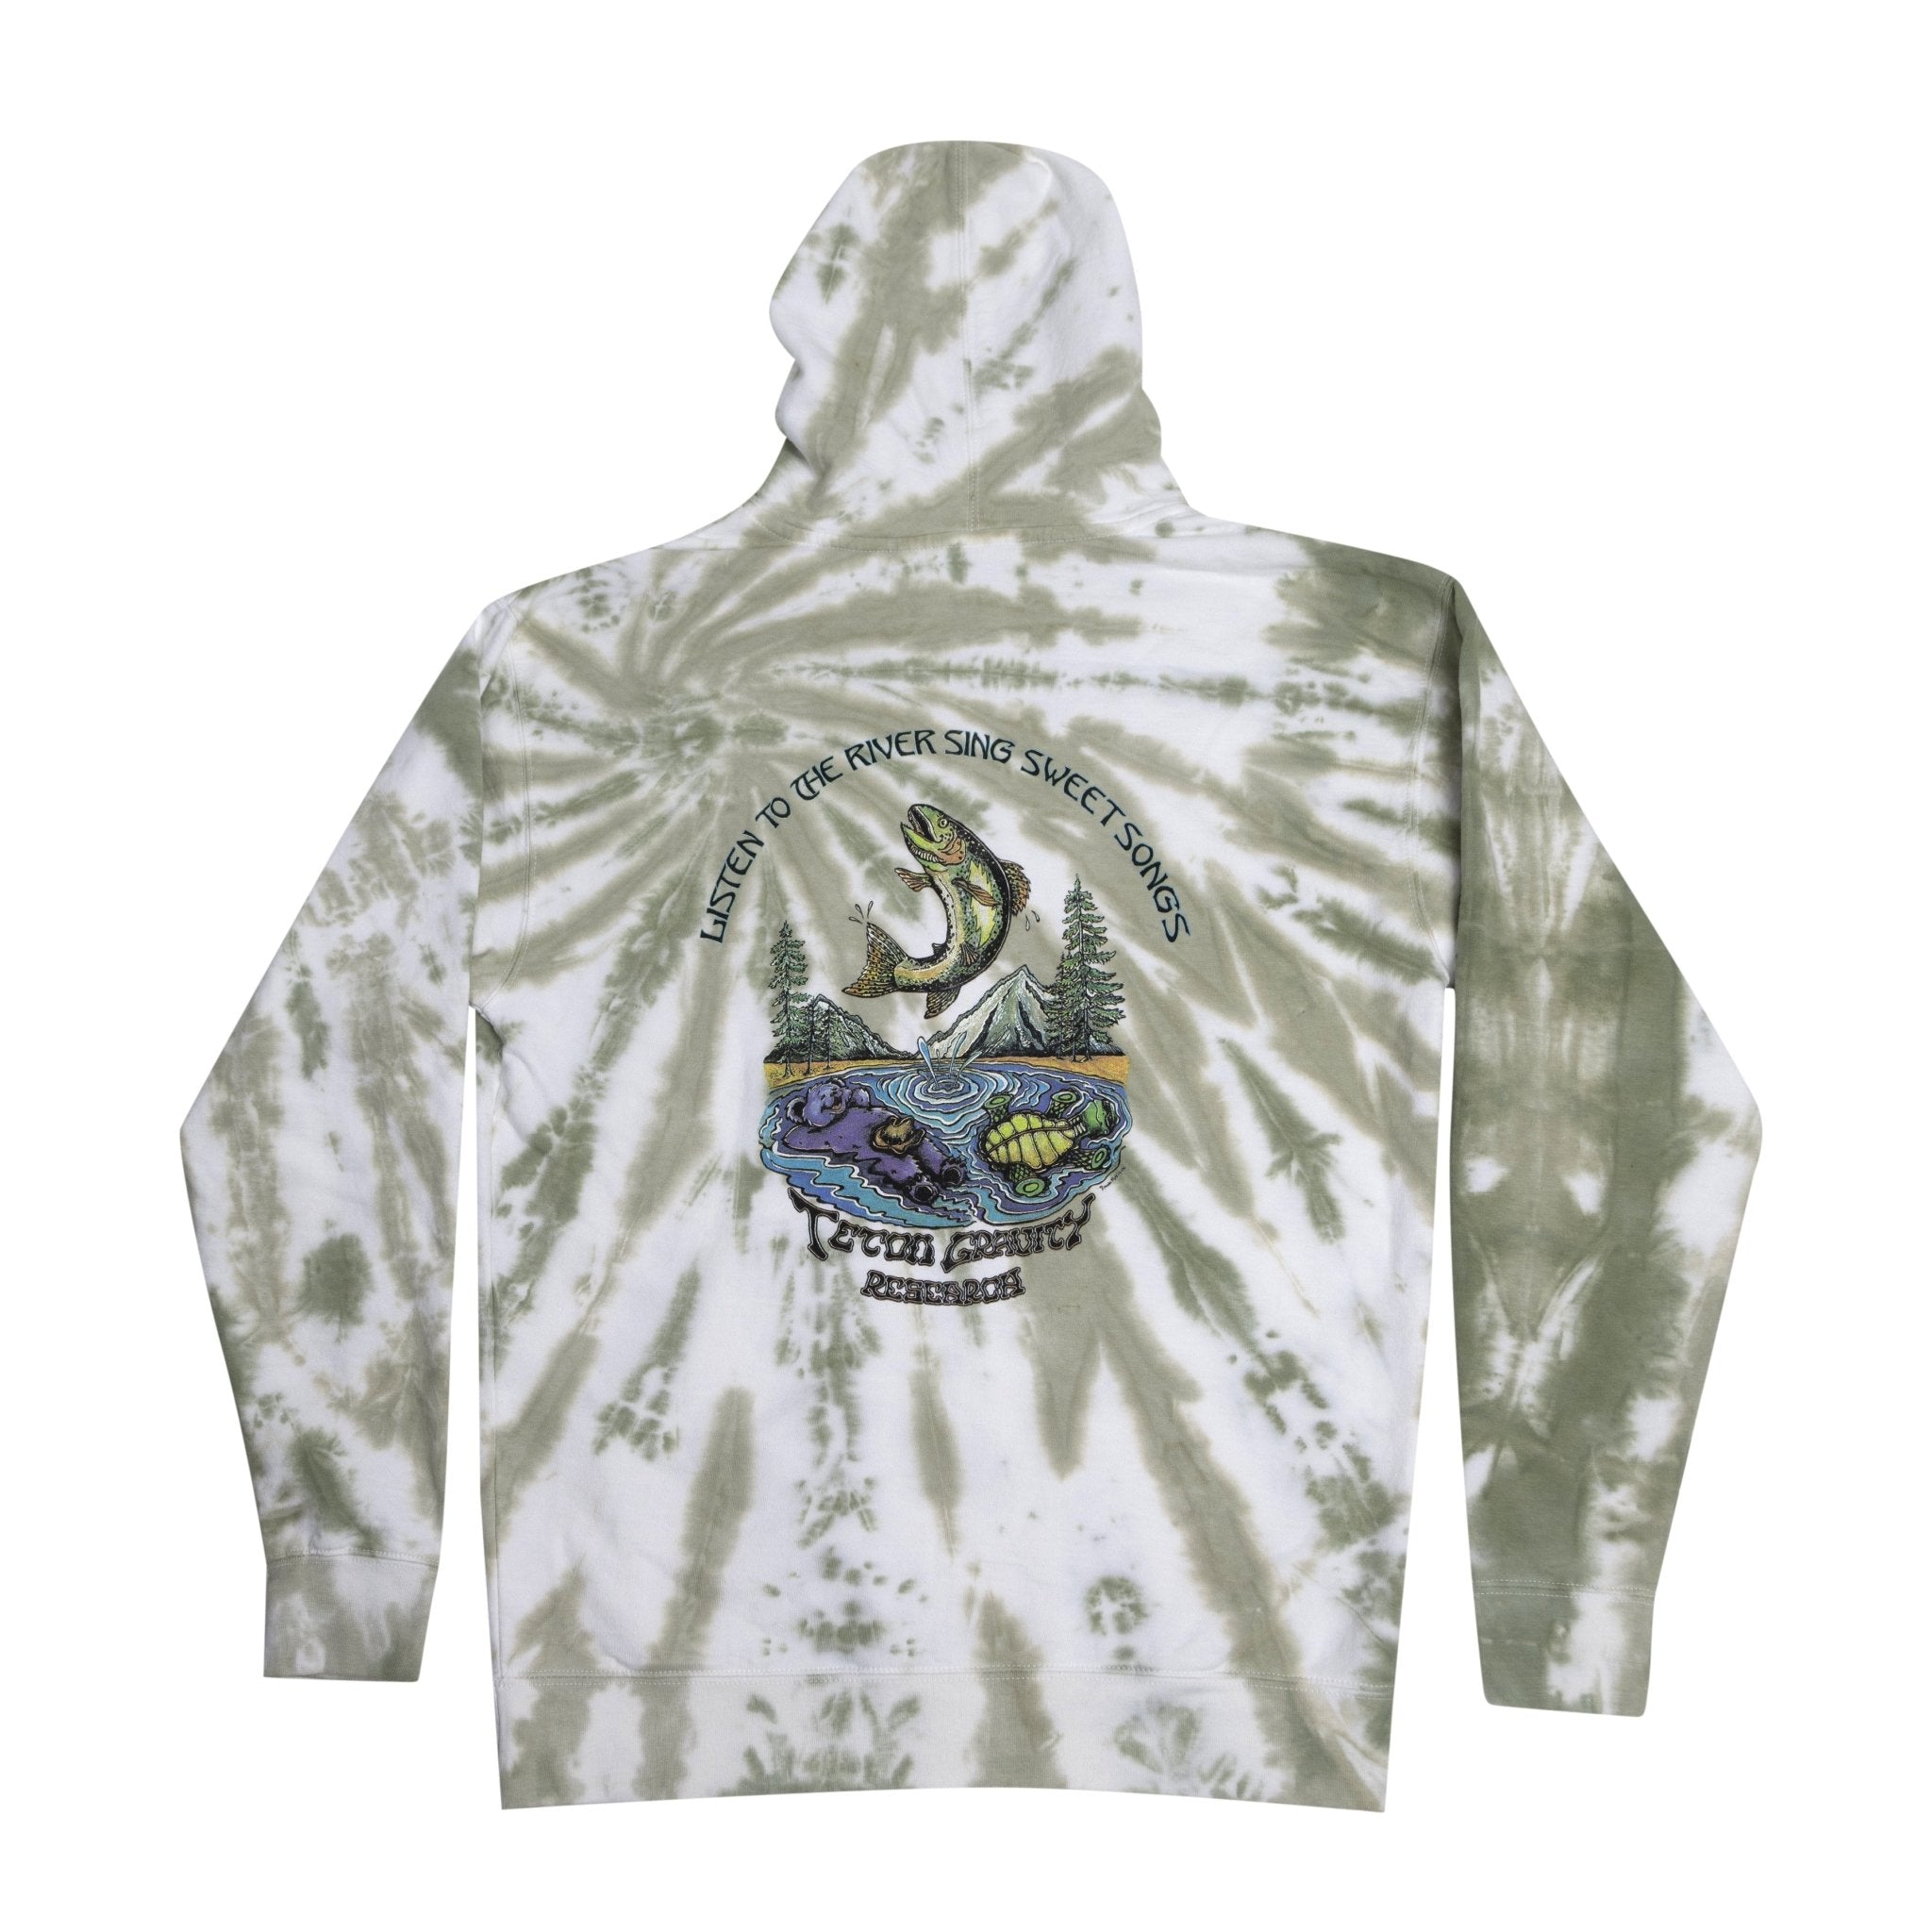 Grateful Dead x TGR Steal Your Fish & ”Listen to the River Sing" Hoodie - Teton Gravity Research